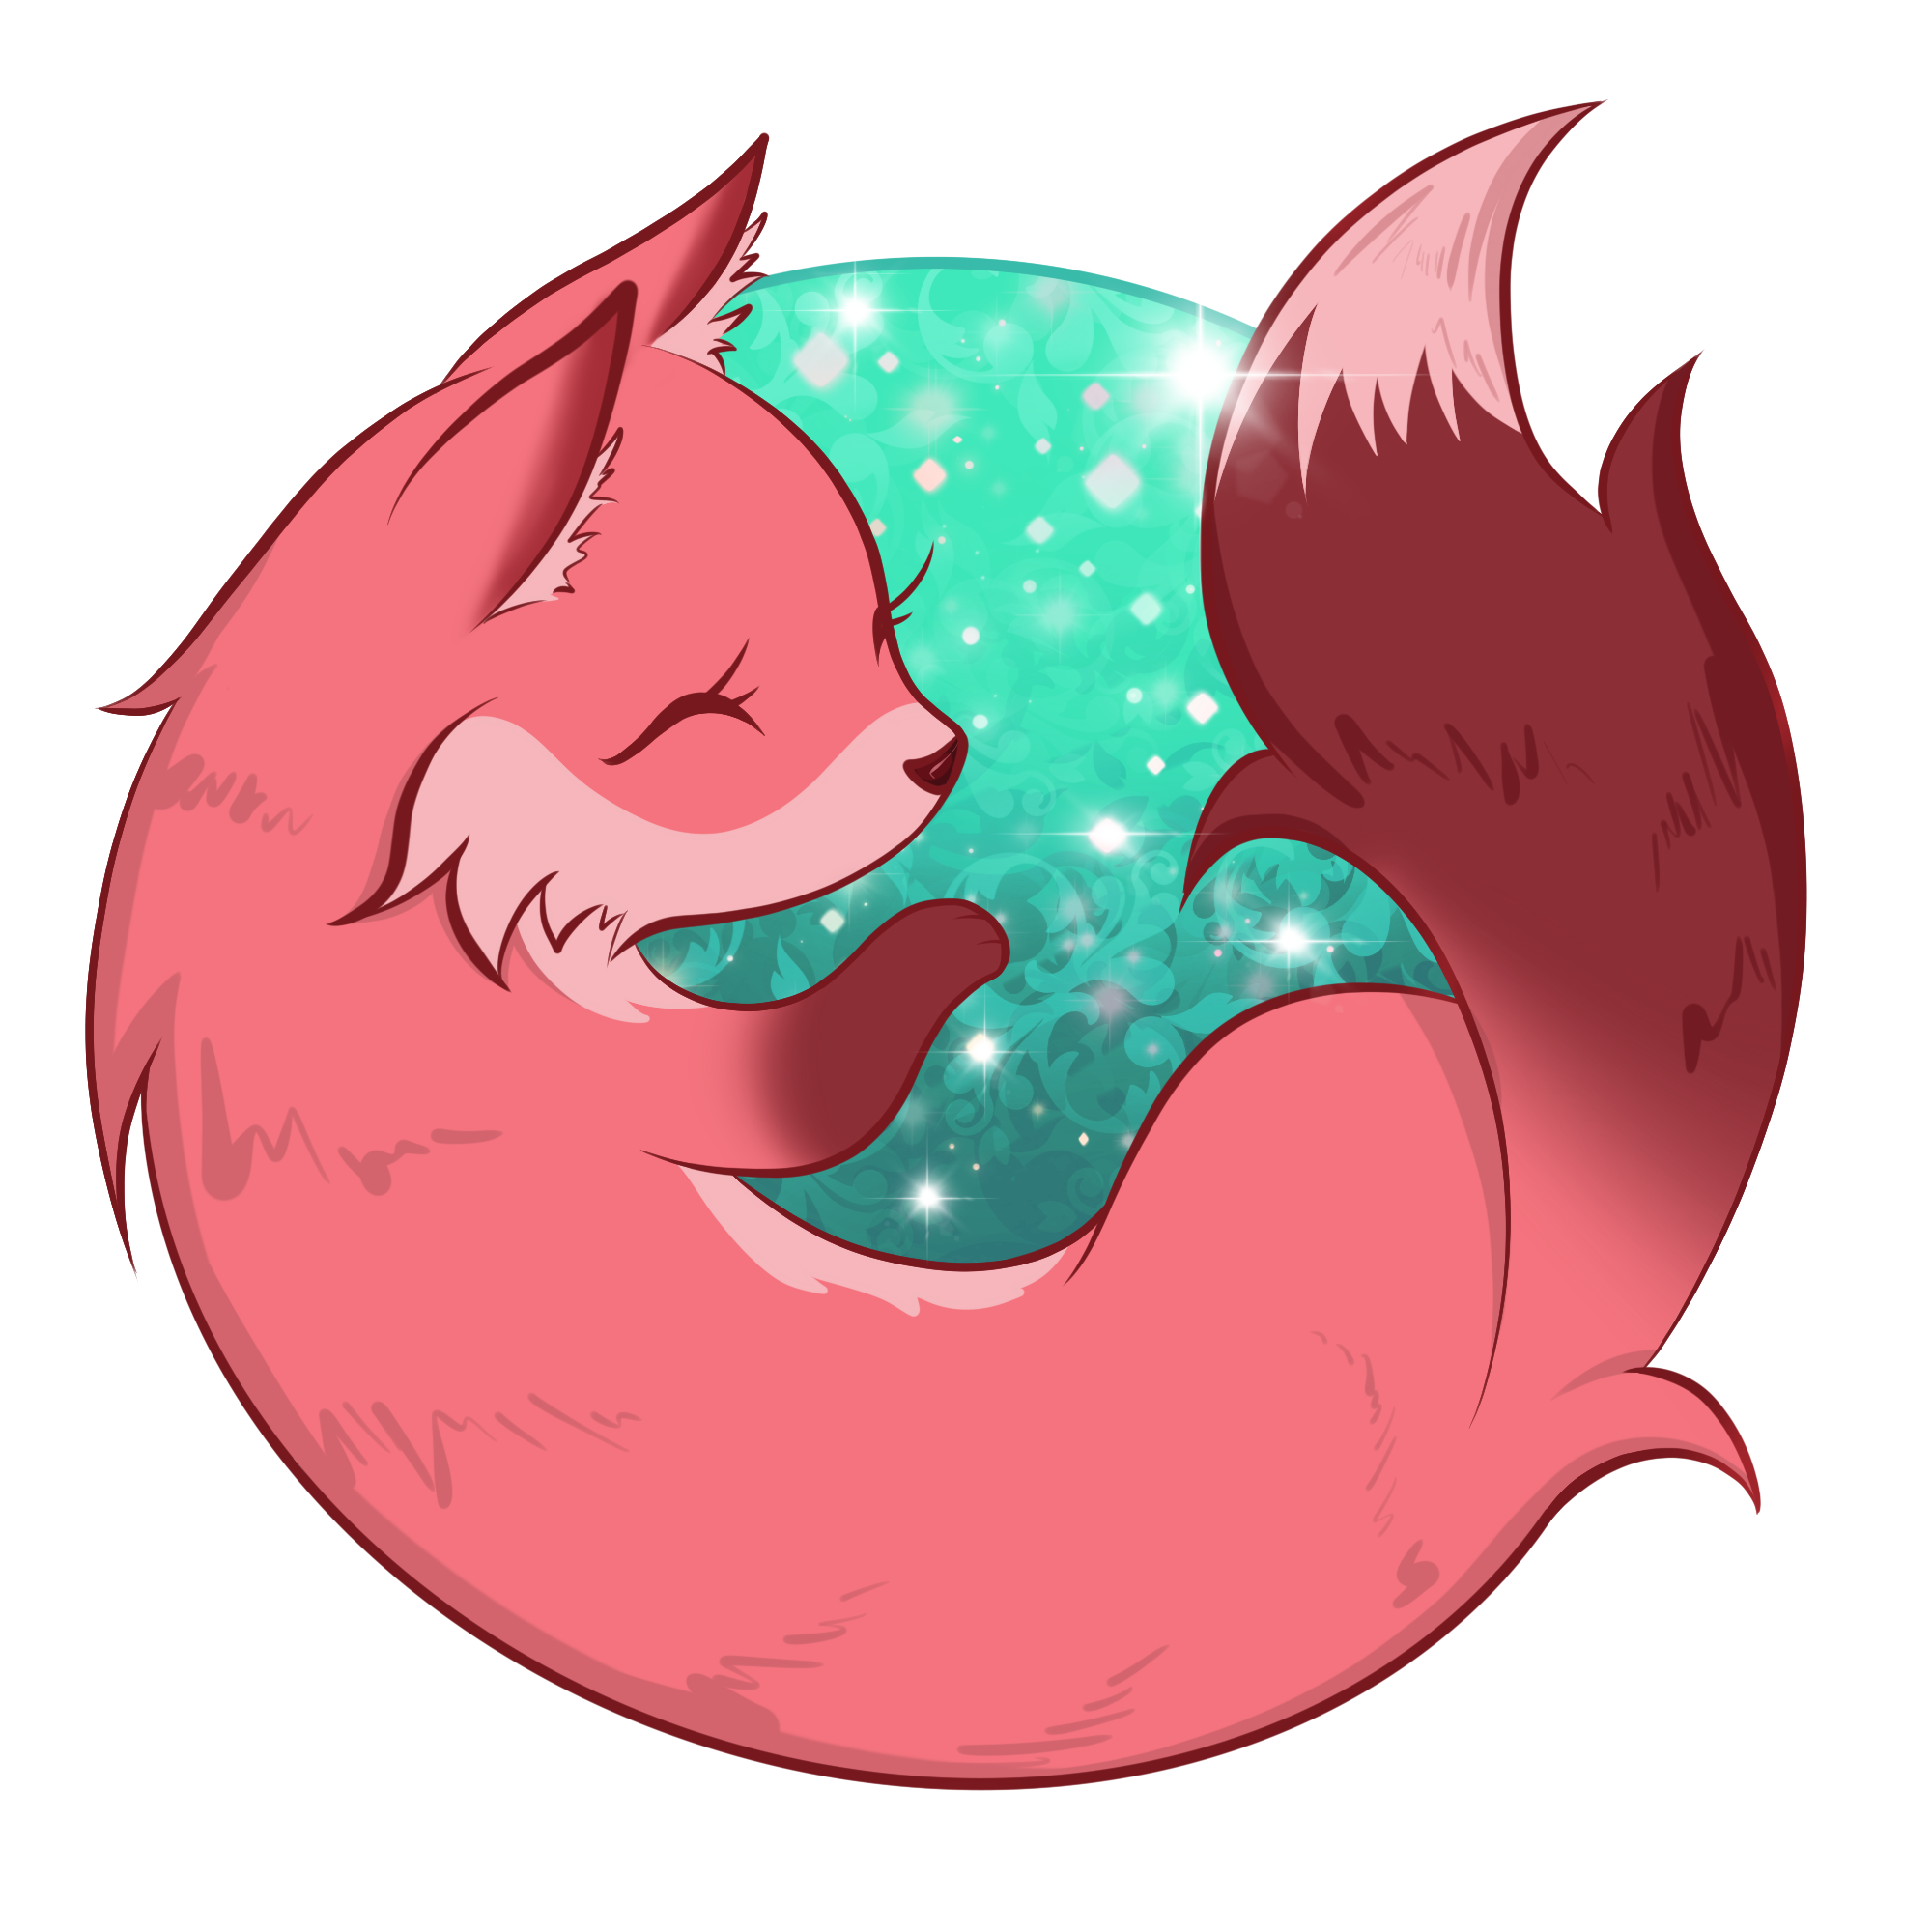 Kawaii-style Firefox icon in pink